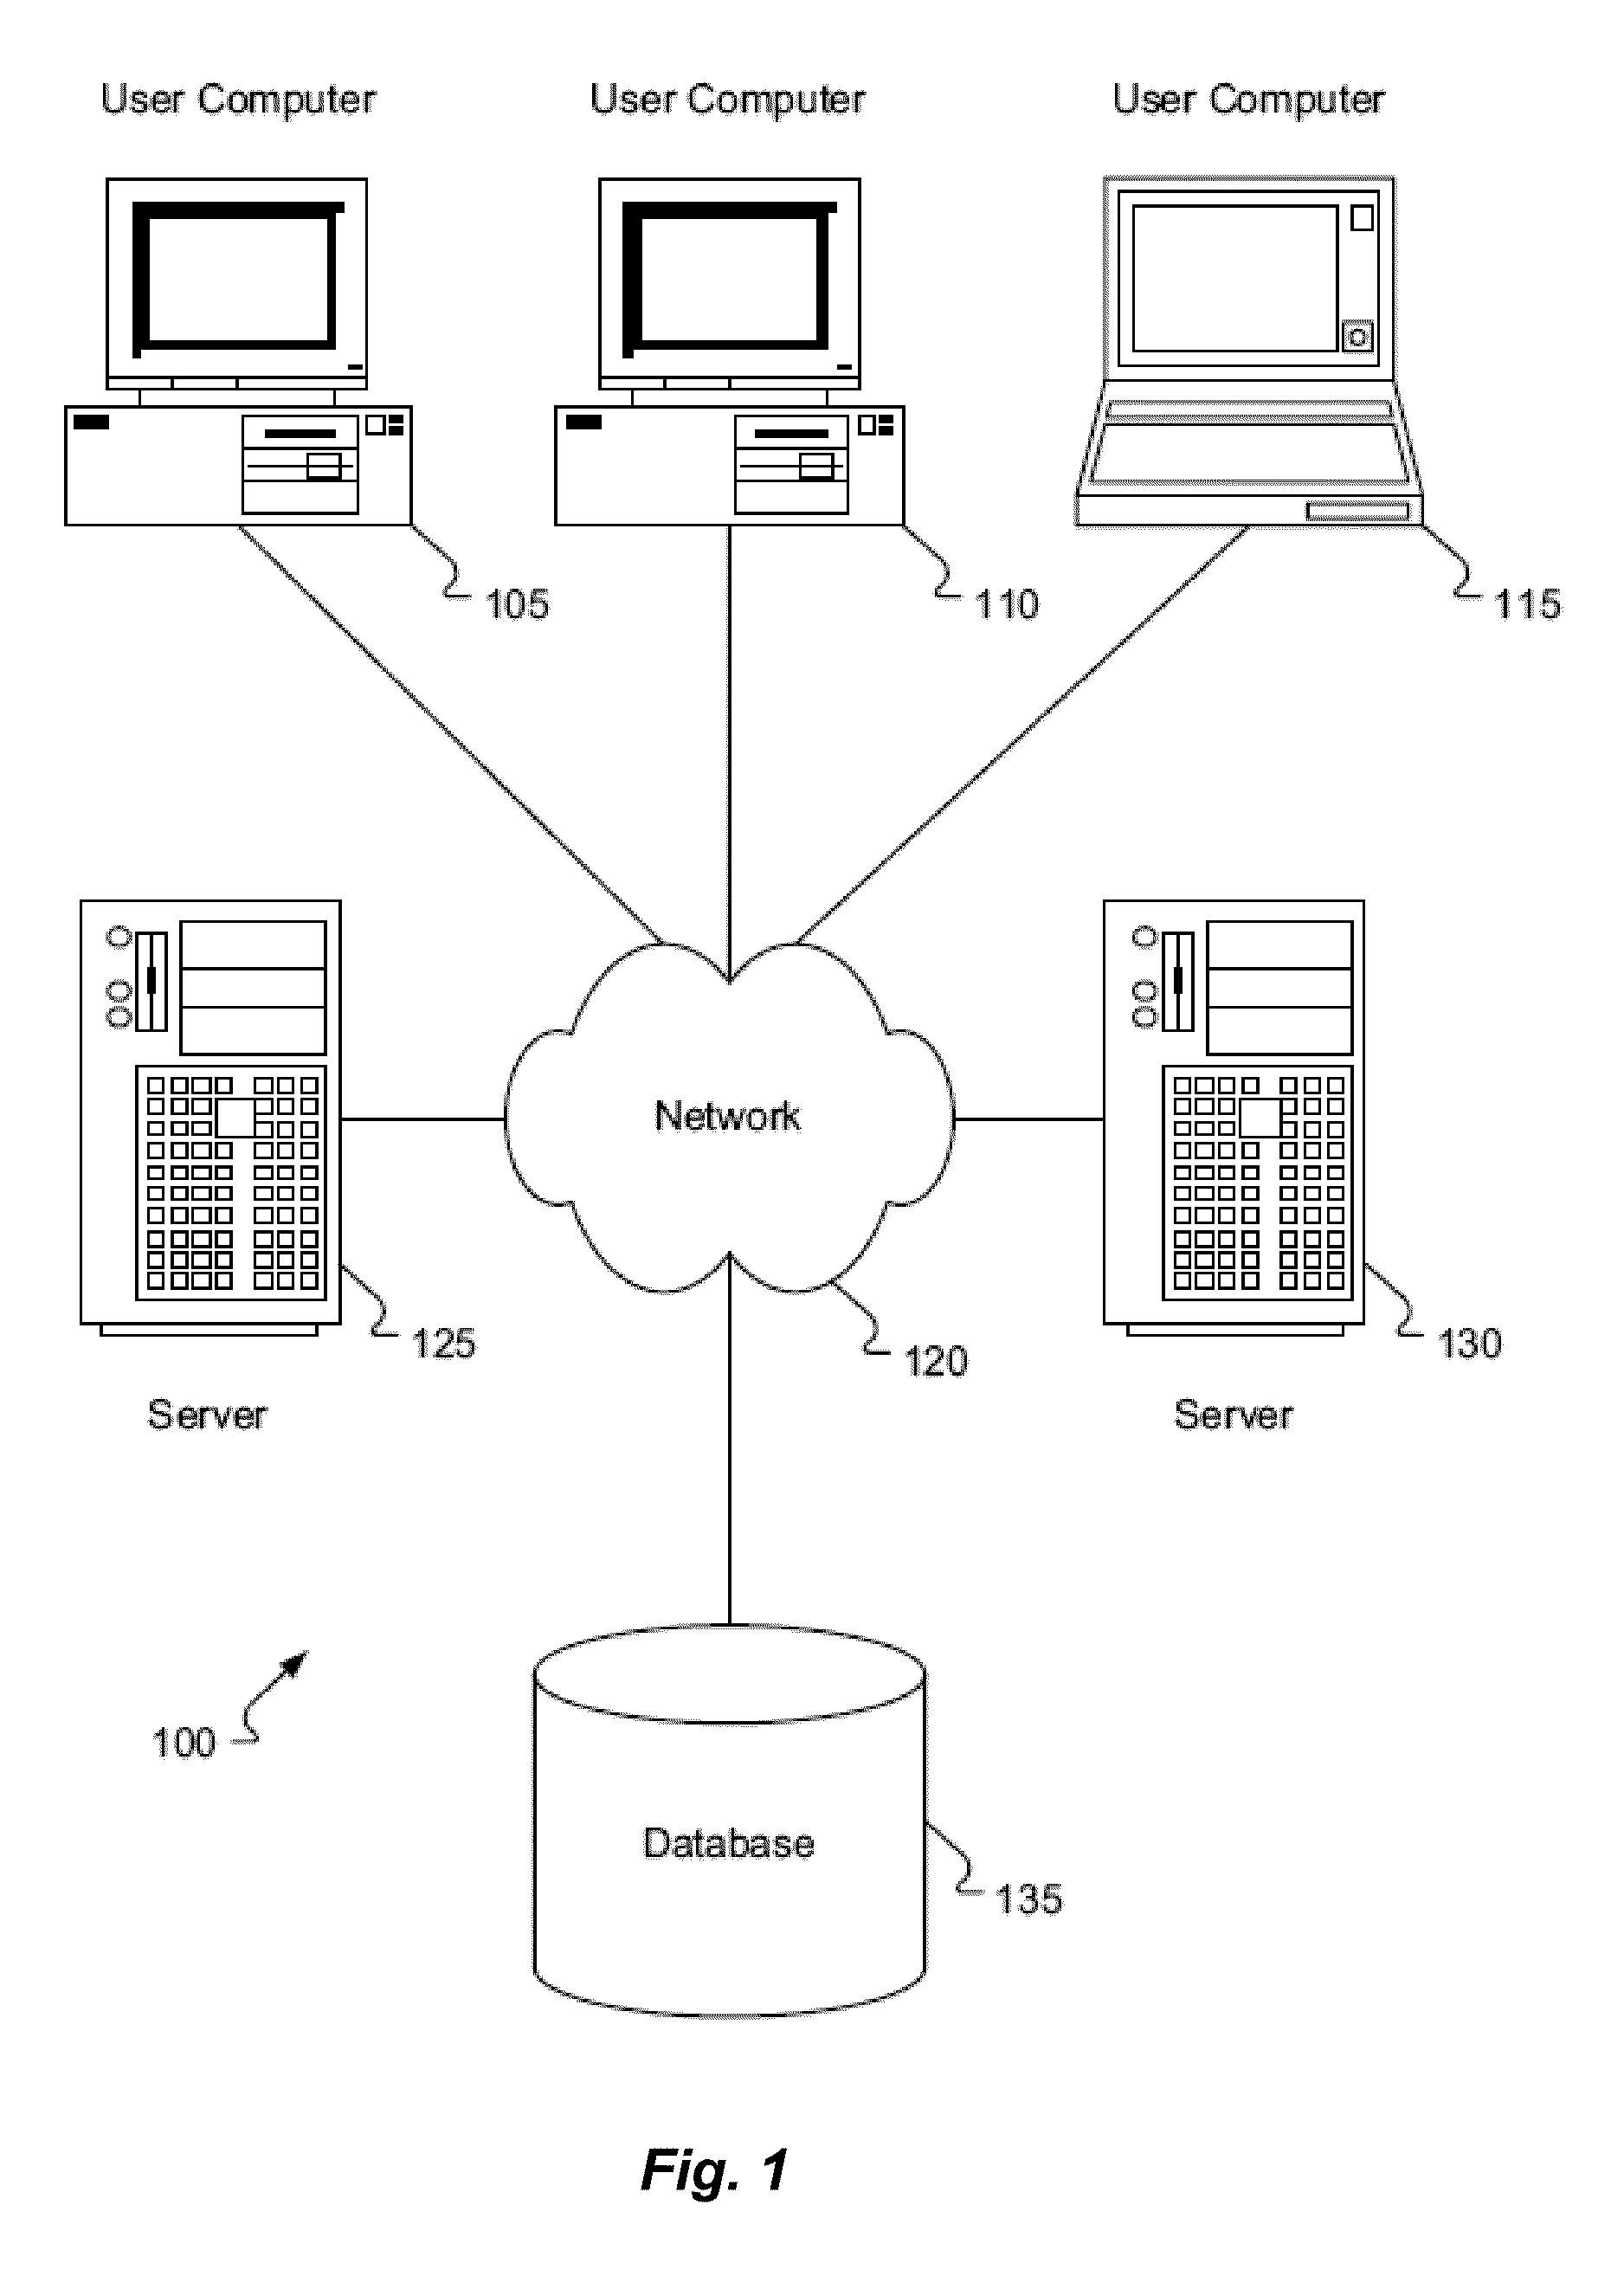 System and method for performance analysis and classification of losses for solar power systems